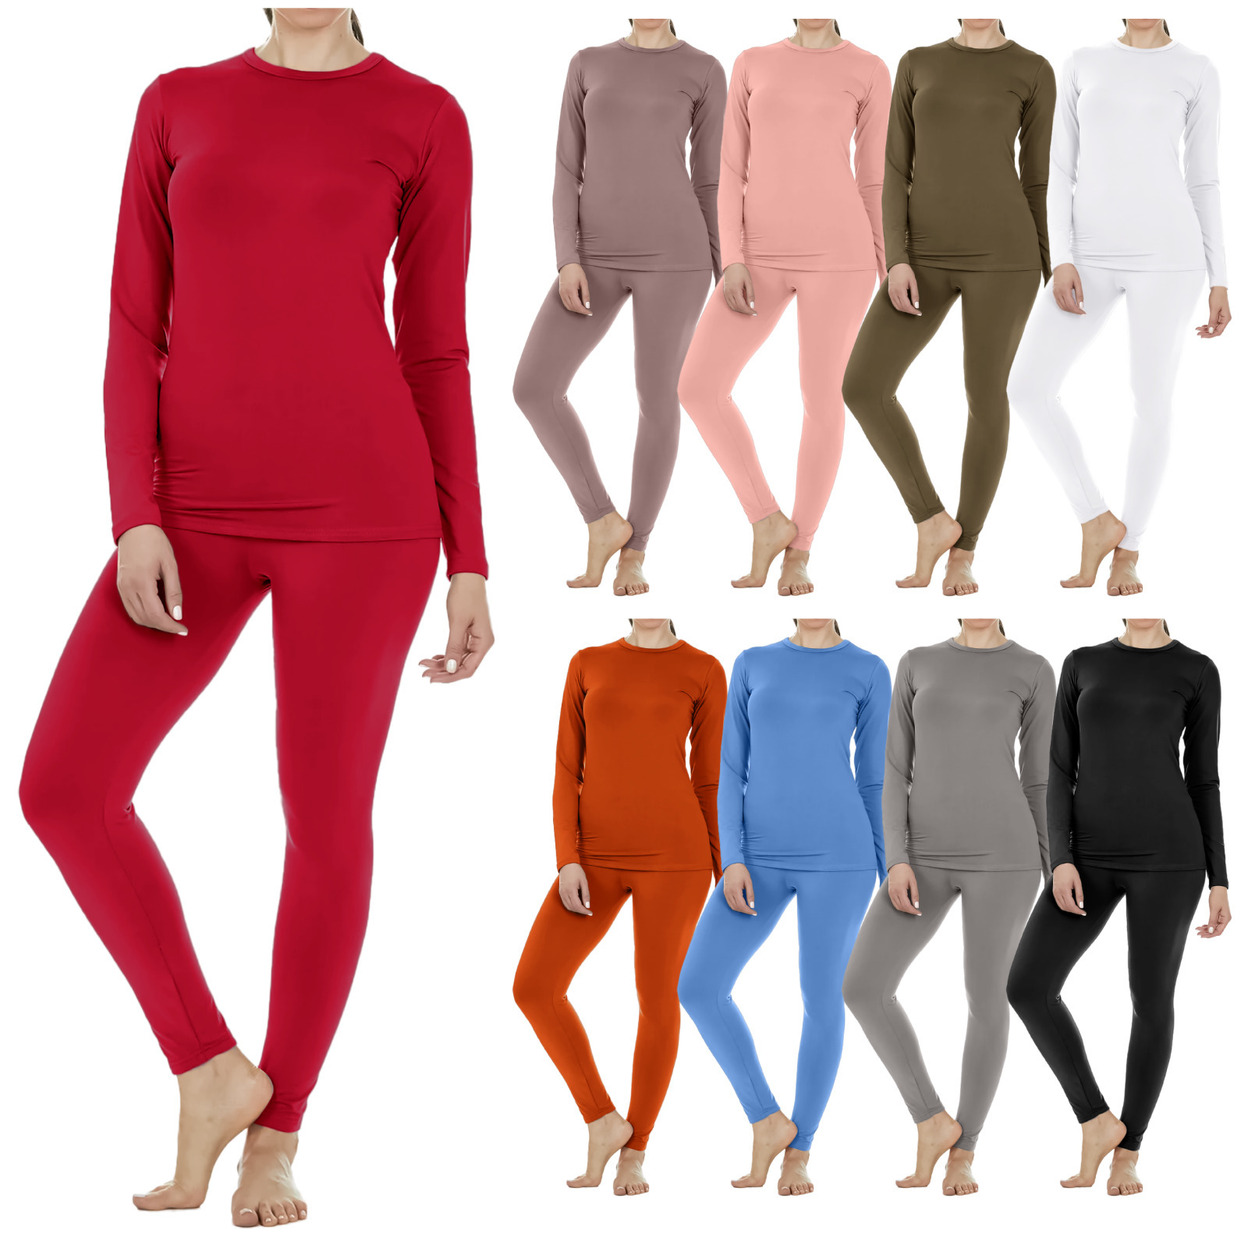 2-Pieces: Women's Fleece Lined Winter Warm Soft Thermal Sets For Cold Weather - Red, Medium